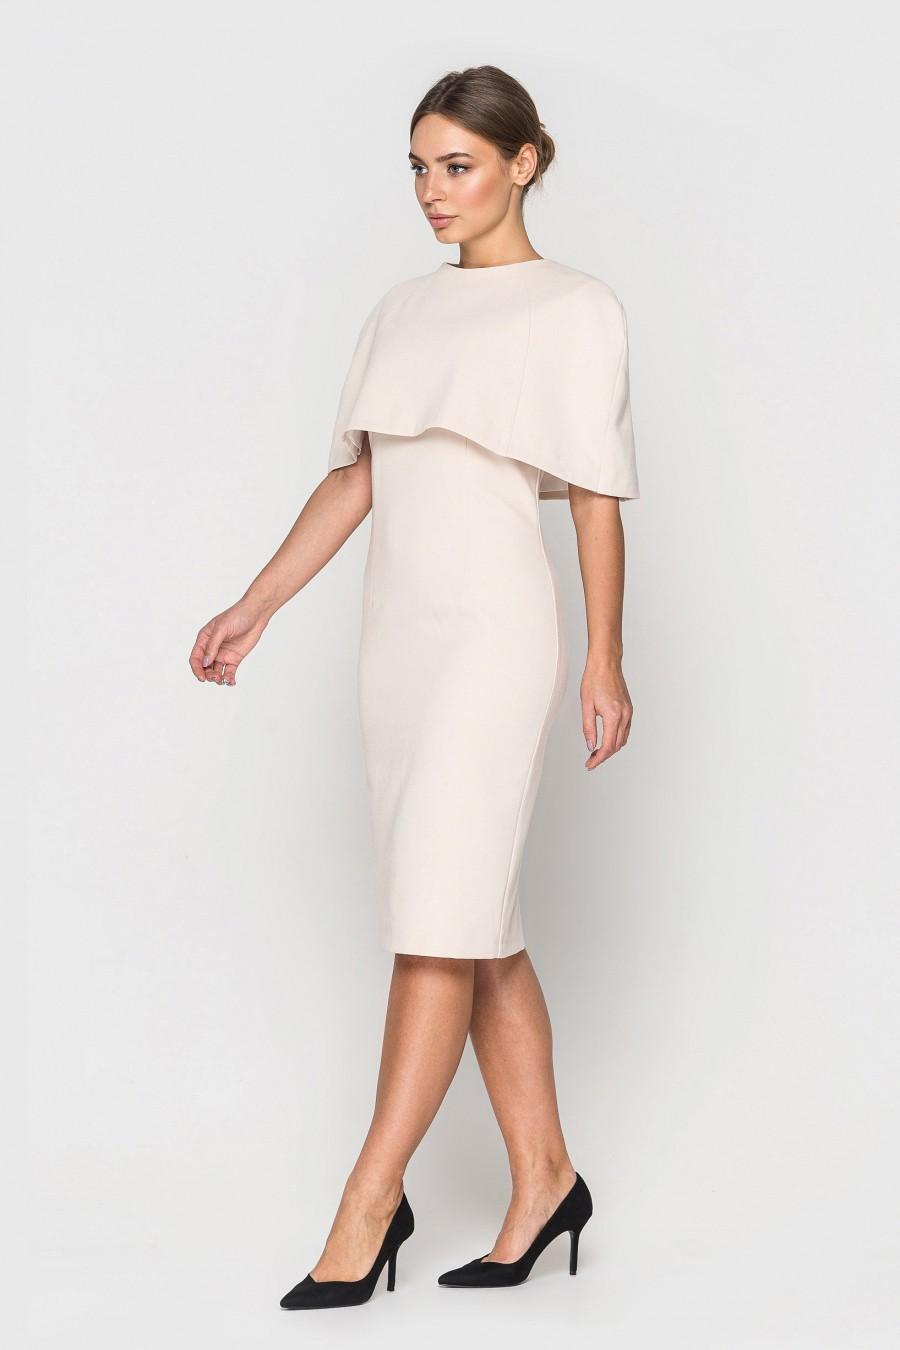 Hochzeit - Cape dress "MEGAN style" in vanilla beige, classic shift dress with a cape for wedding or business